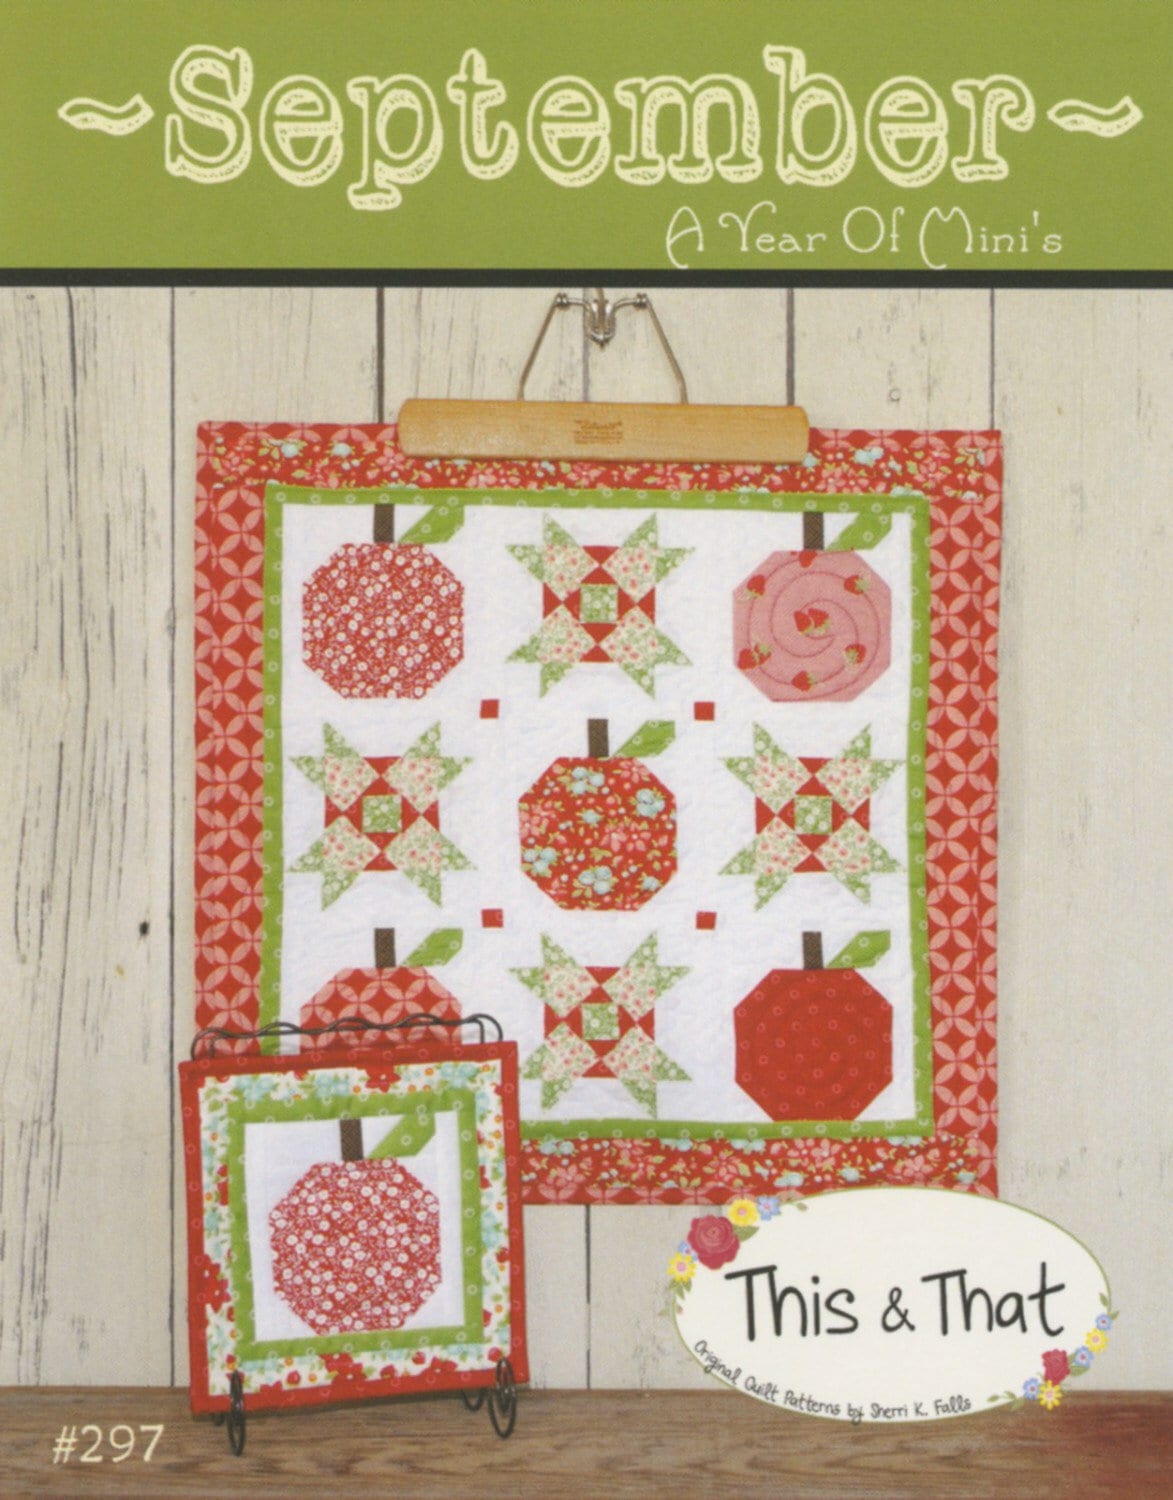 A Year of Minis - September Mini Quilt Pattern - This & That - Sherri Falls